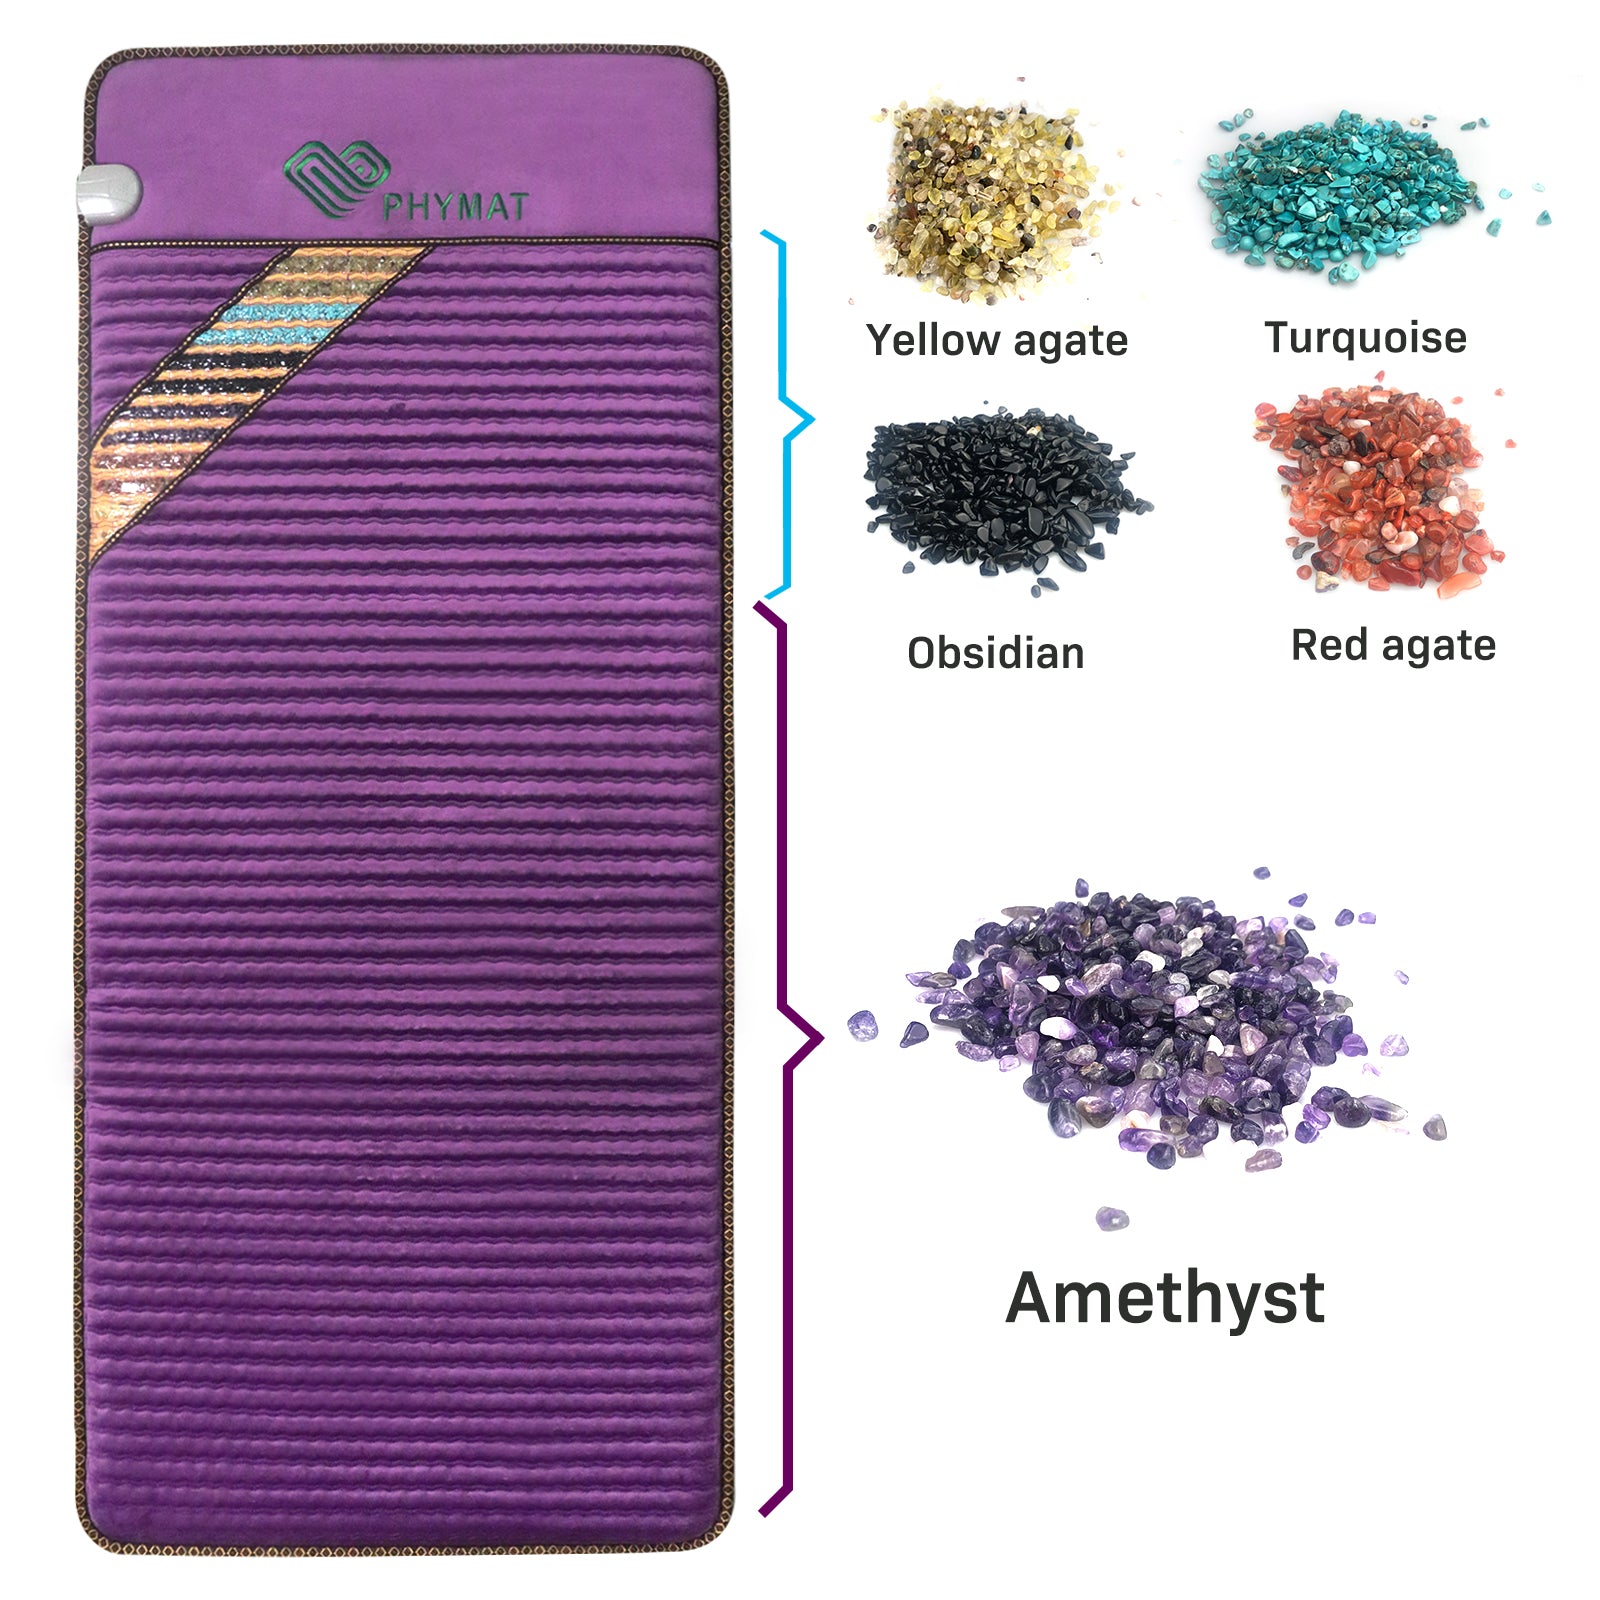 PHYMAT PEMF Therapy Mat Far Infrared Amethyst Heating Pad (70"x31")- 5 Color Natural Crystal PHYMAT